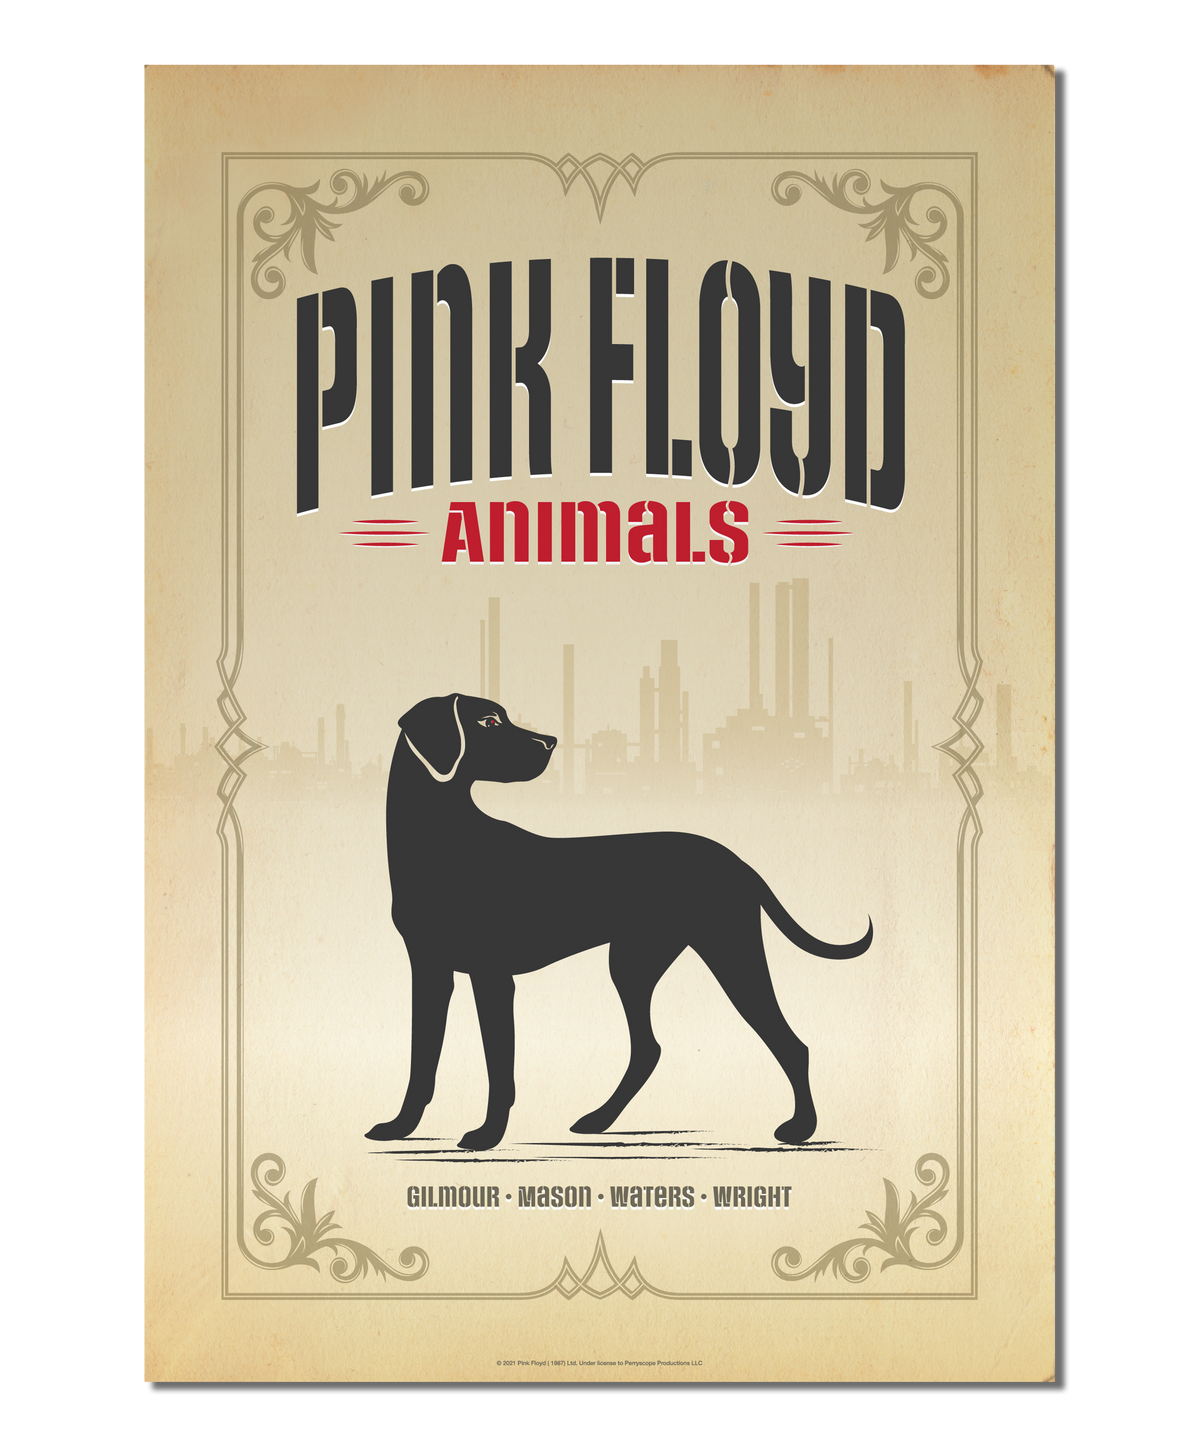 Pink Floyd Print Inspired by the album, "Animals: "Dog" Version